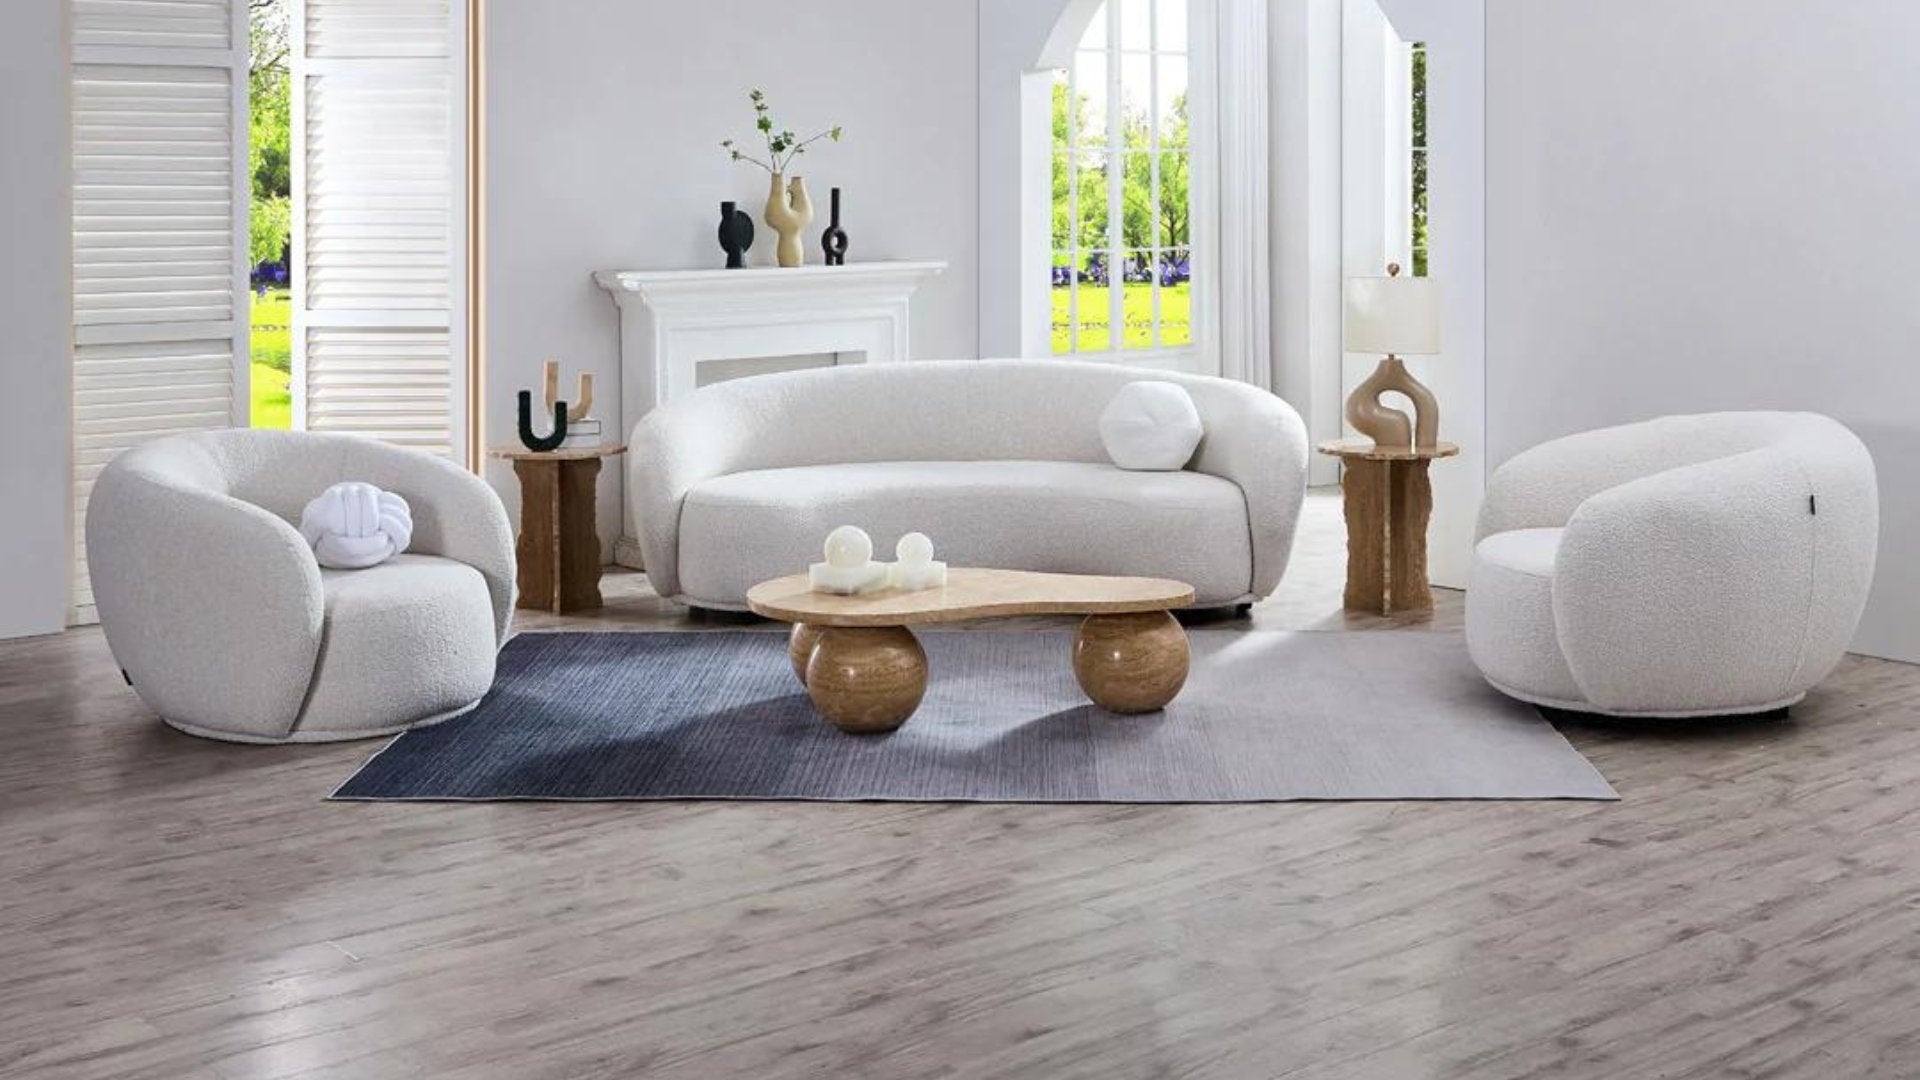 Curvo Sofa and armchairs with Travertine Sphere Coffee table in living room setting